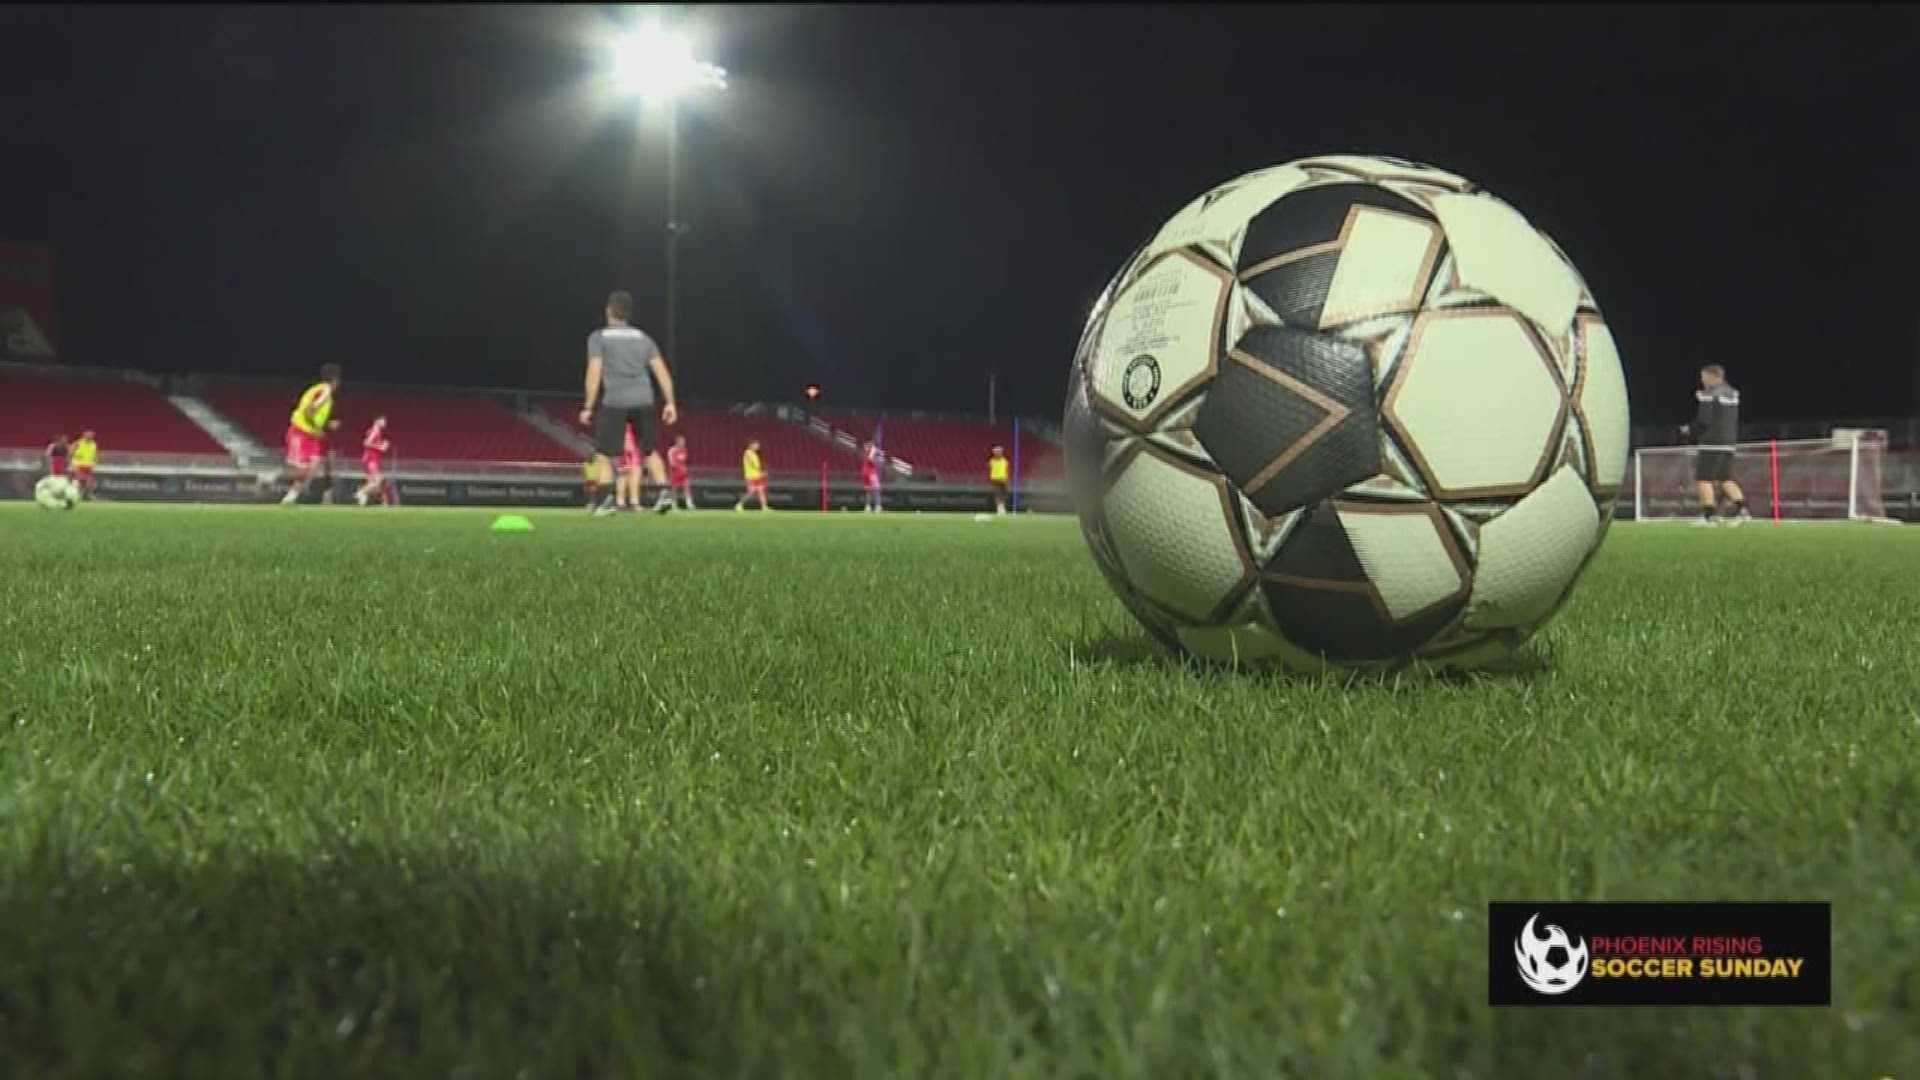 The head coaches for Phoenix Rising and FC Tucson share more than just the top spots on Arizona's soccer teams, they have a history that dates back decades. This content is sponsored by the Phoenix Rising FC.